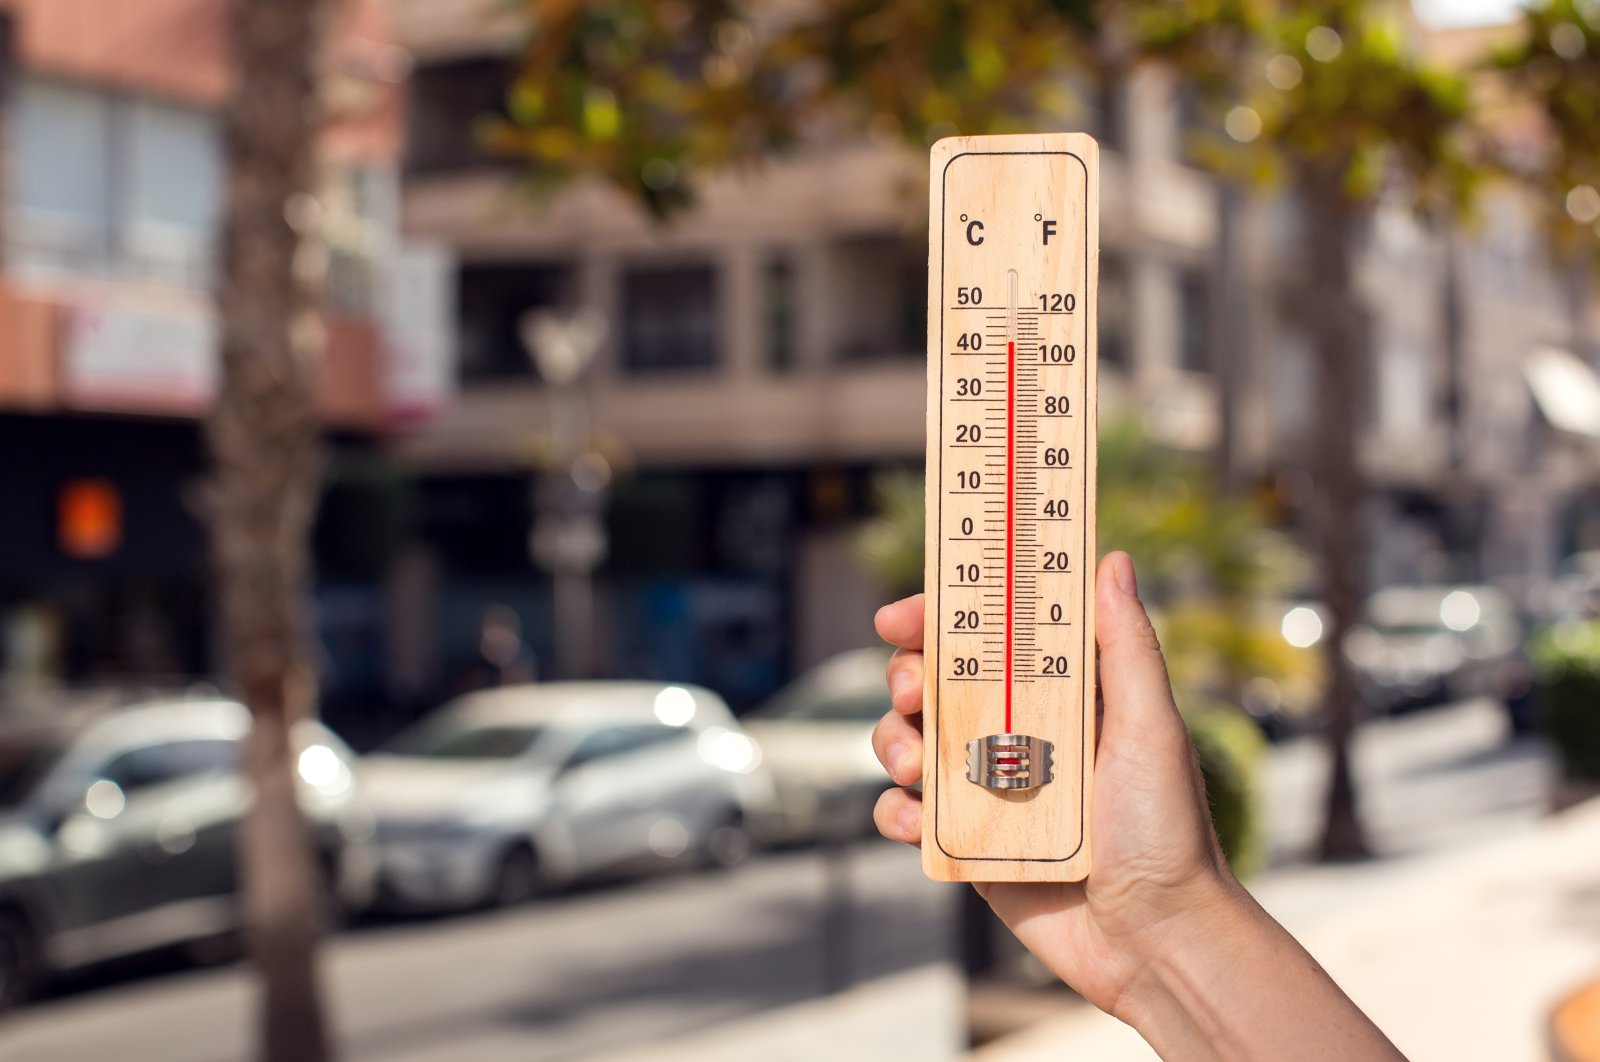 The Mediterranean basin, where Türkiye is situated, faces warming of 1.5 times the global rise in terms of hot extremes. (Shutterstock Photo)